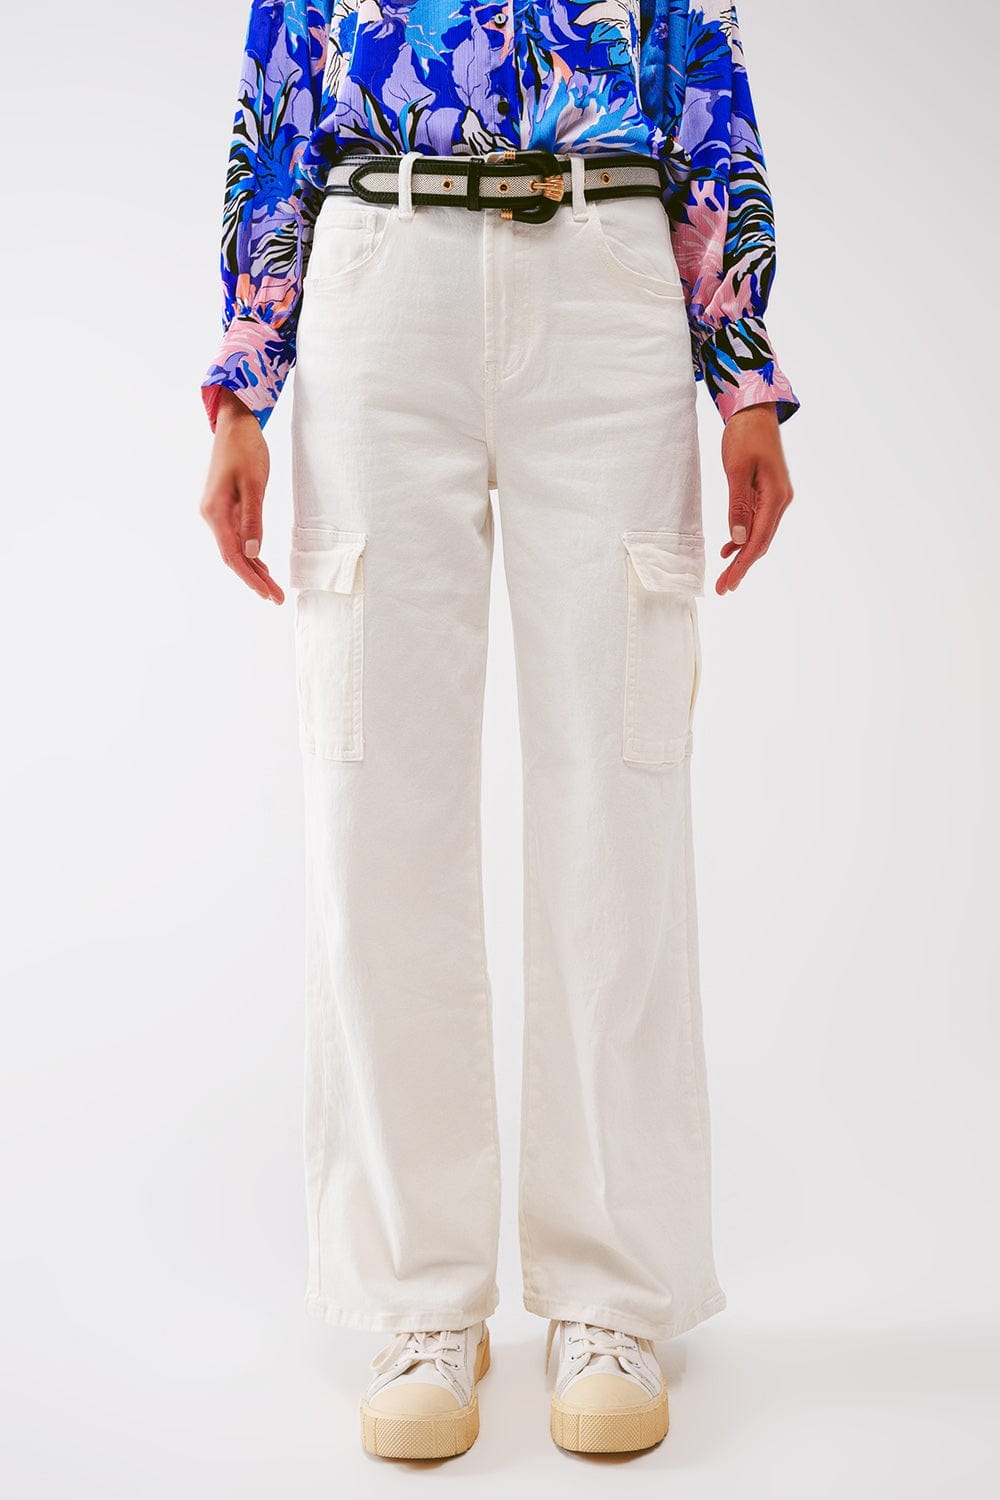 Q2 Women's Pants & Trousers Straight Leg Cargo Jeans in White